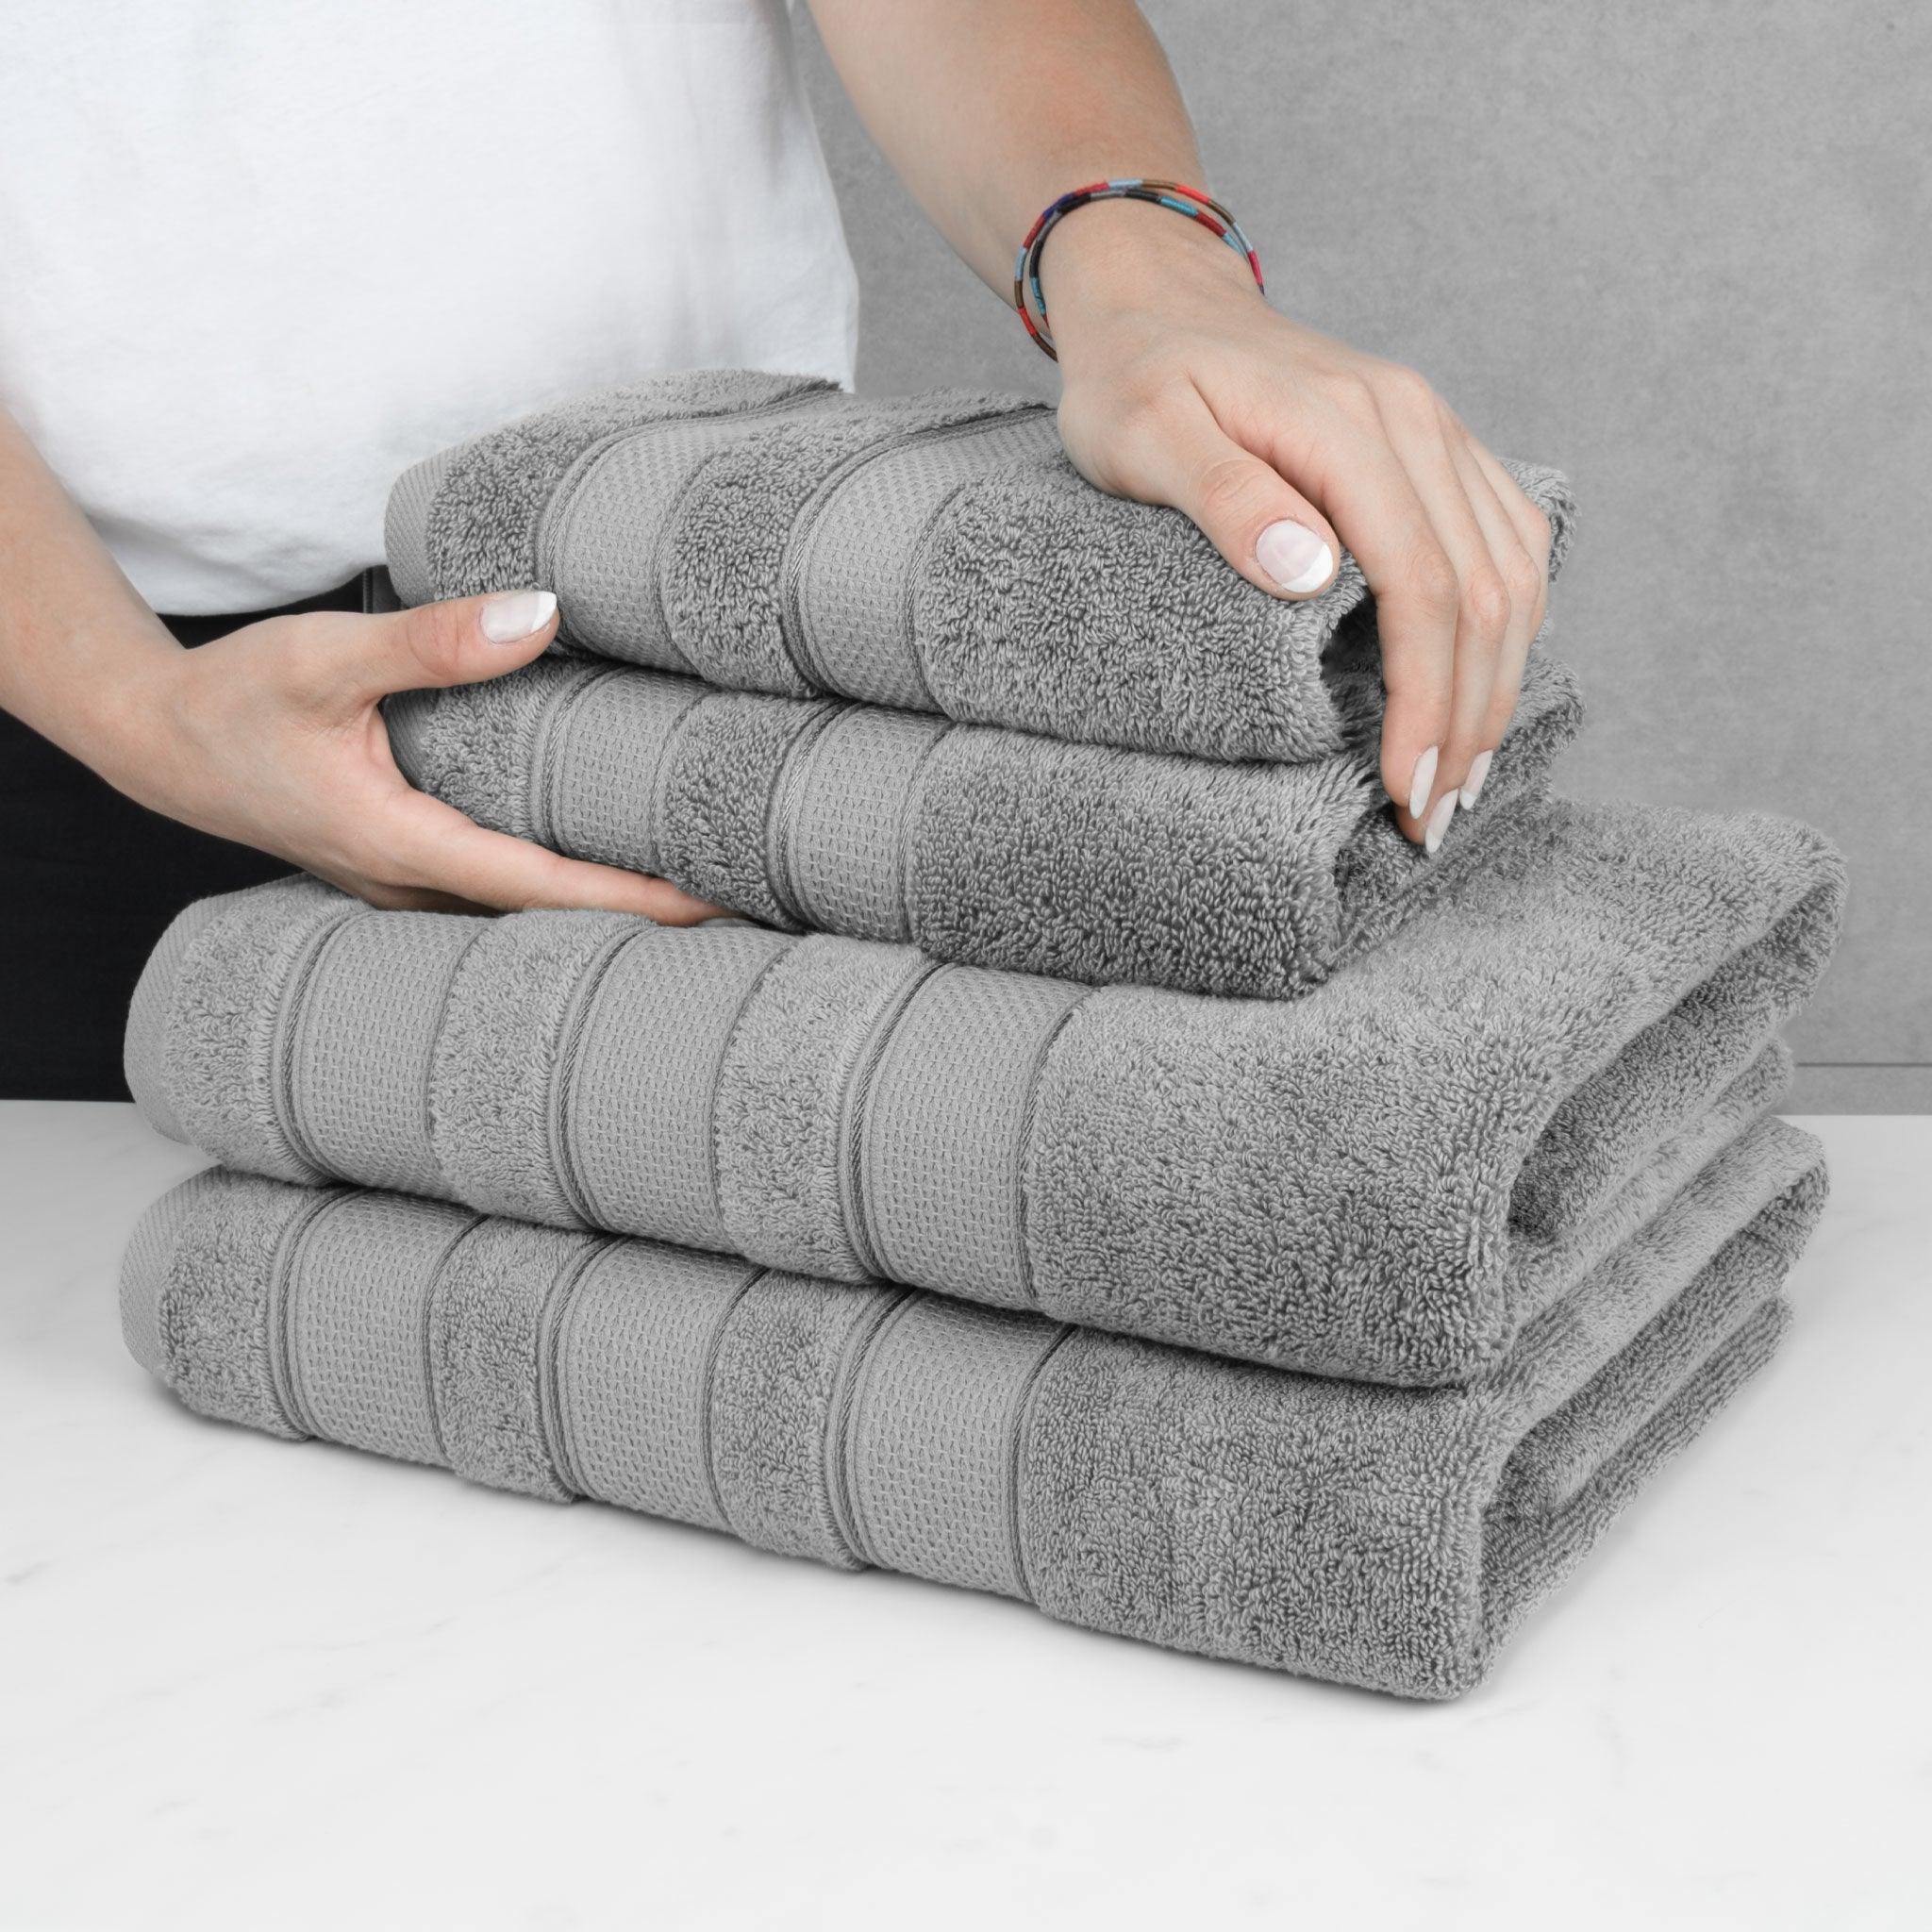 Top 5 Tips for Selecting a Luxurious Bath Towel - American Soft Linen